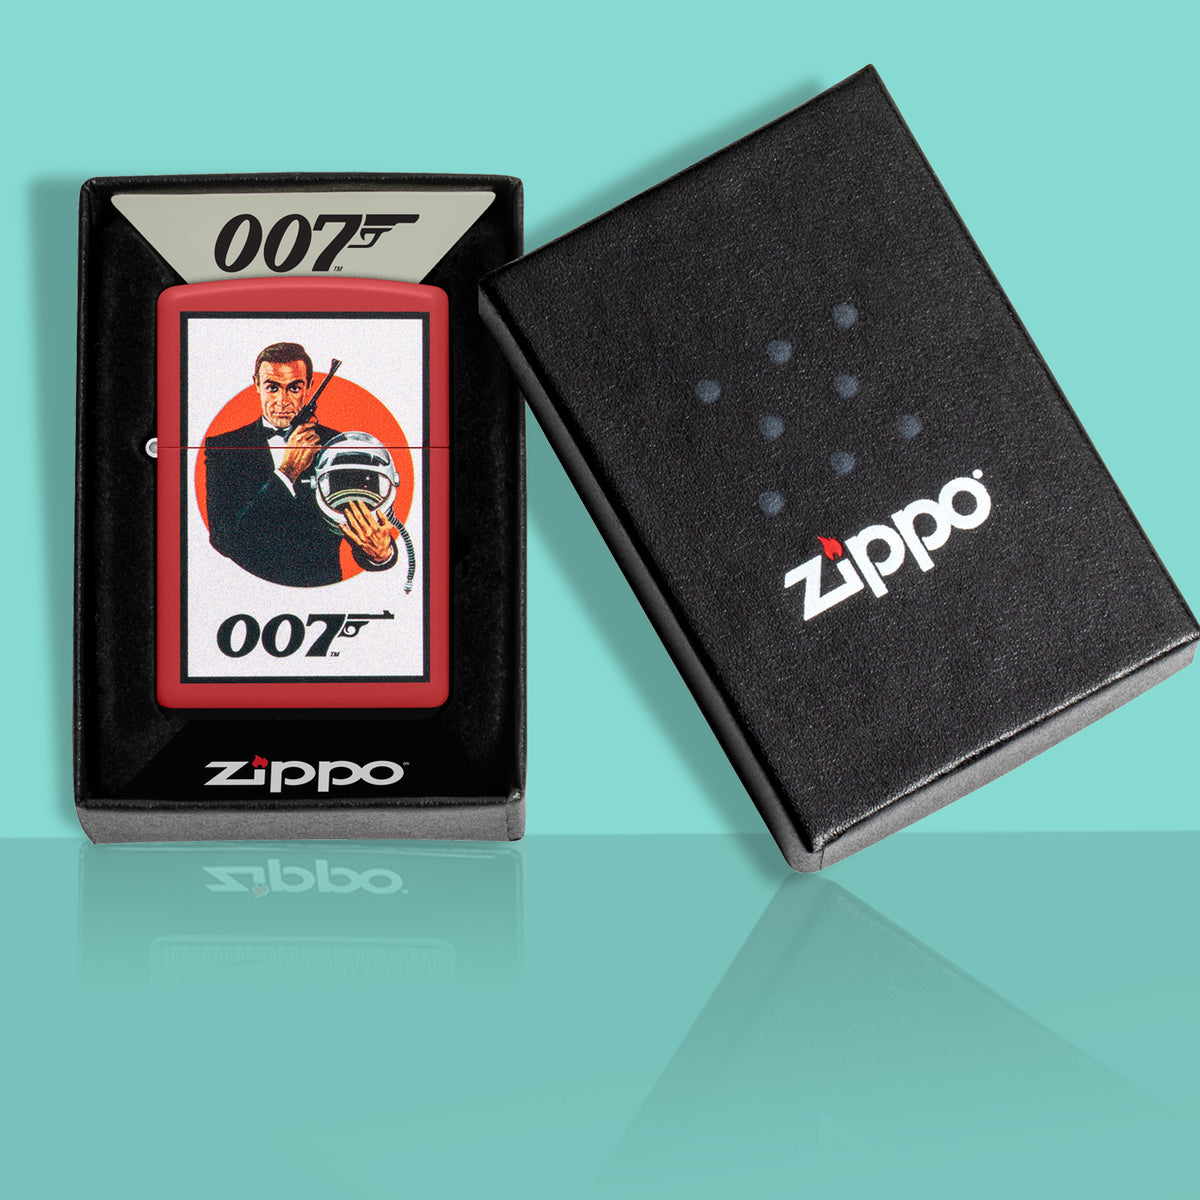 James Bond Zippo Lighter - You Only Live Twice Red Case